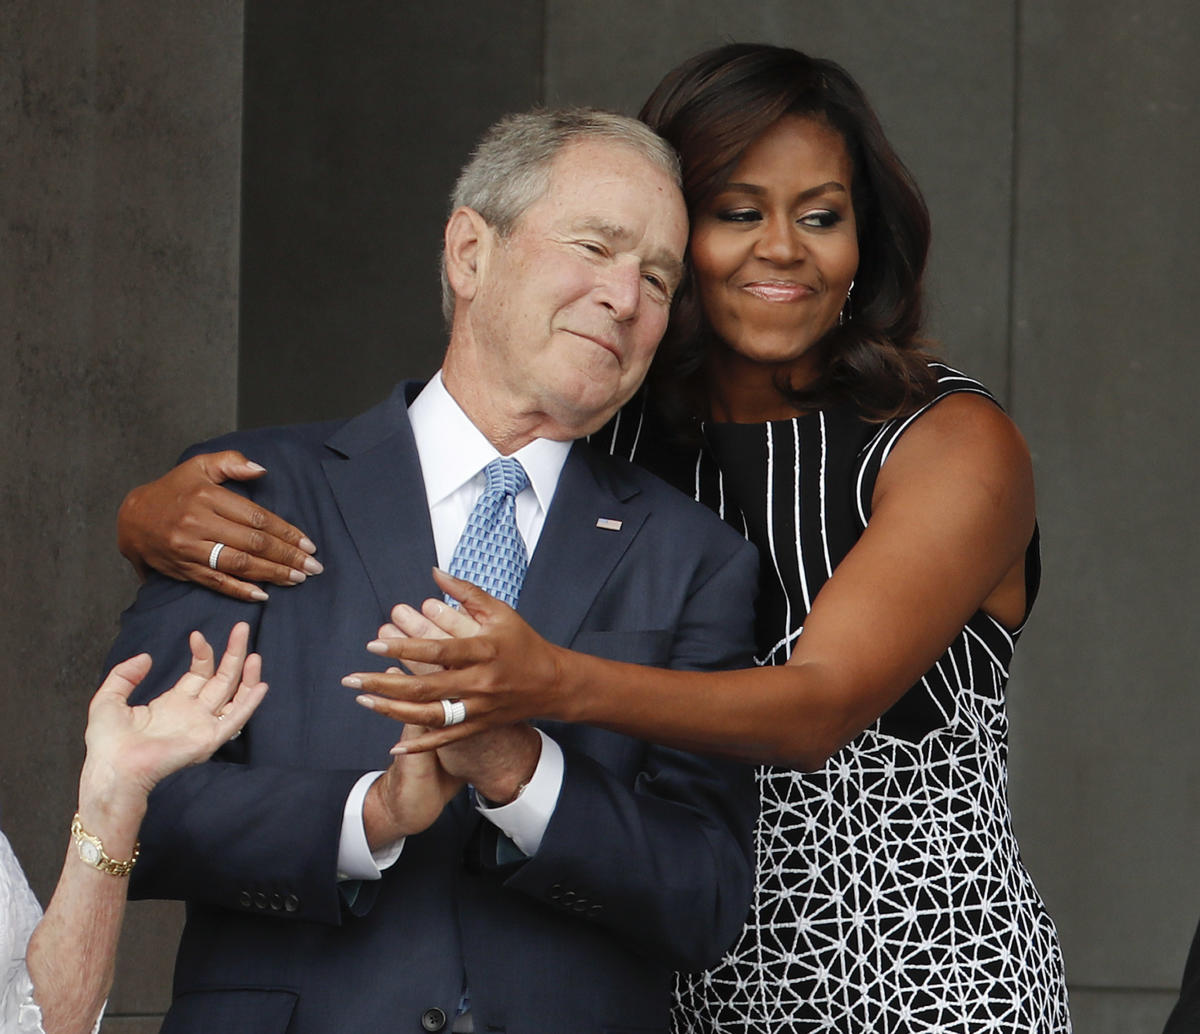 Michelle Obama Captions - The former first lady defended their relationship